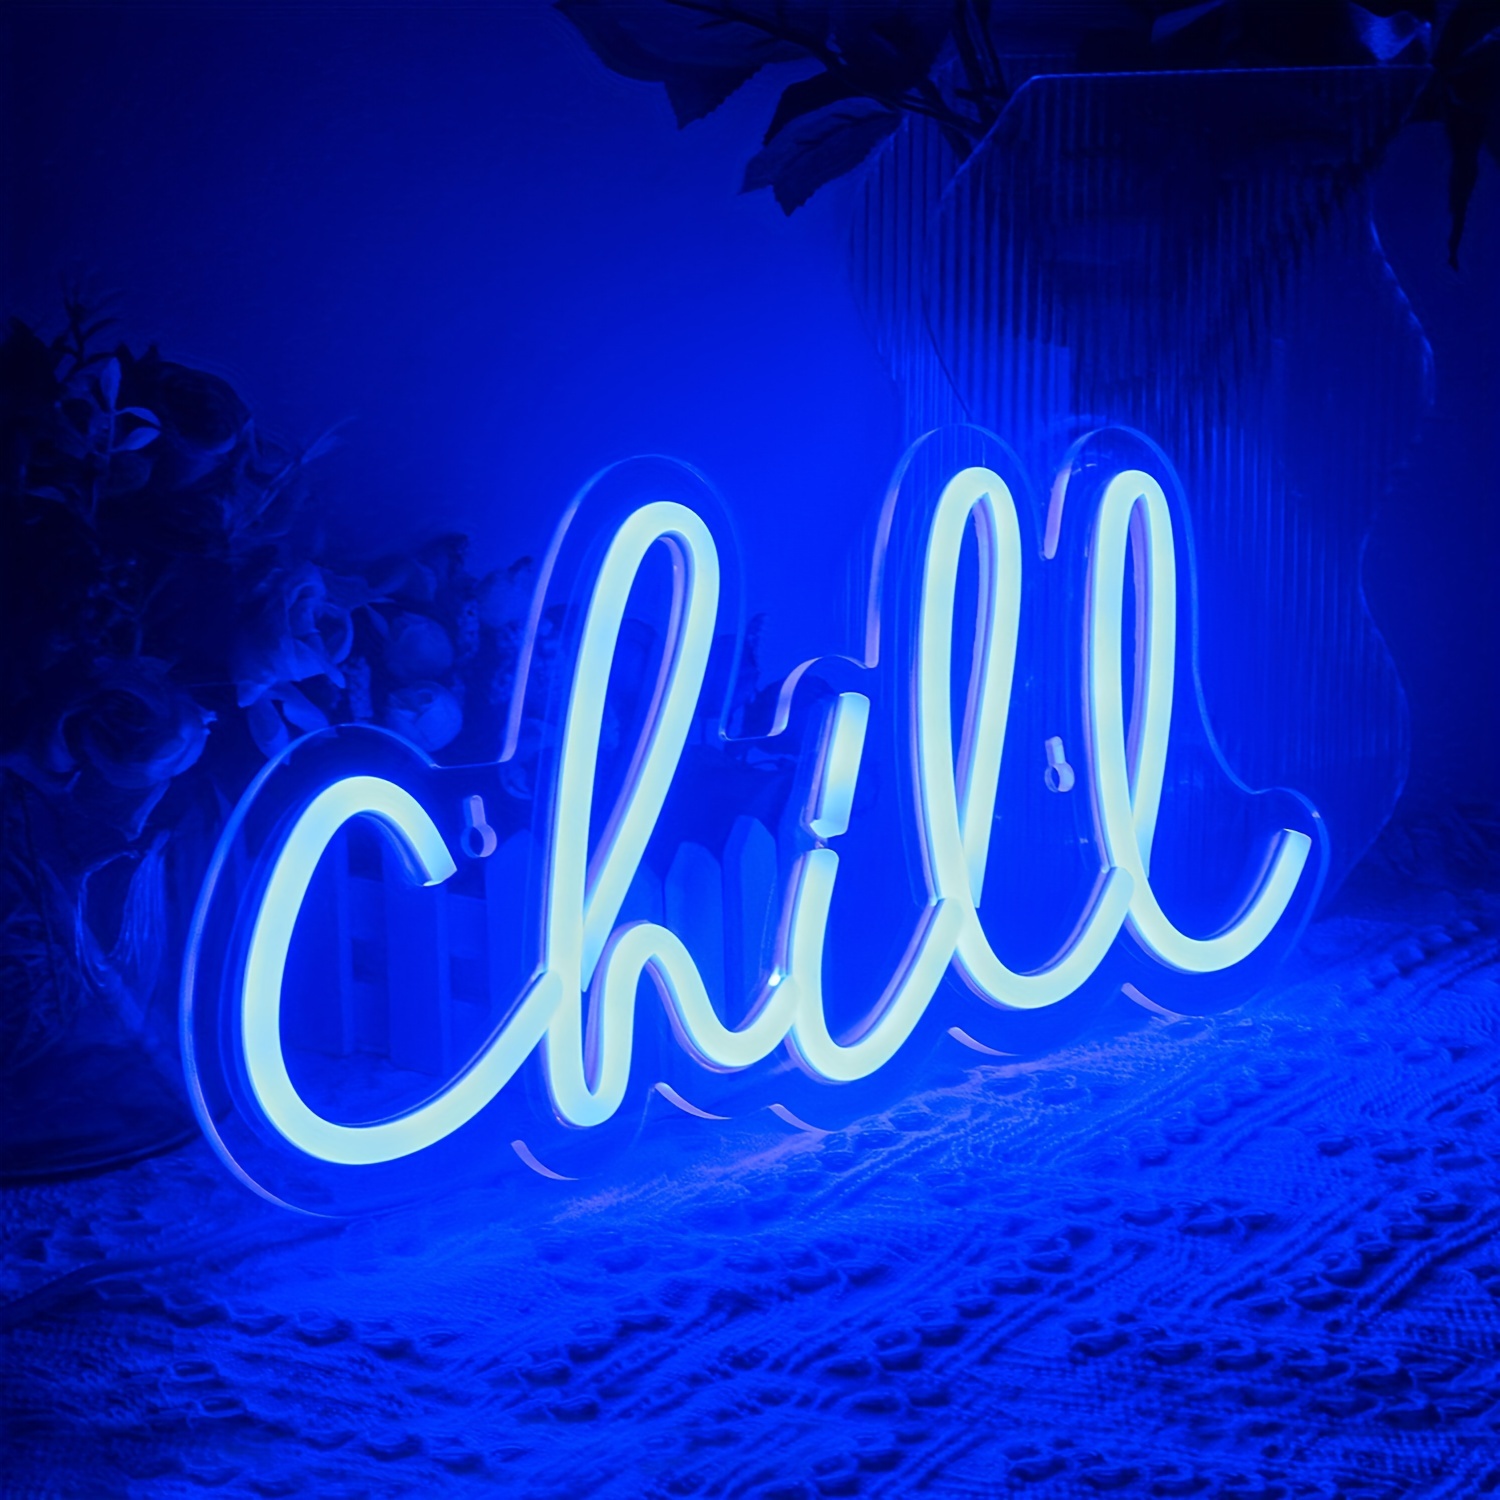 1pc chill blue neo wall decorate club party neon light gifts for her shop home bedroom cave atmosphere led neon light wall hanging light birthday gift lamps christmas valentines day new year decor